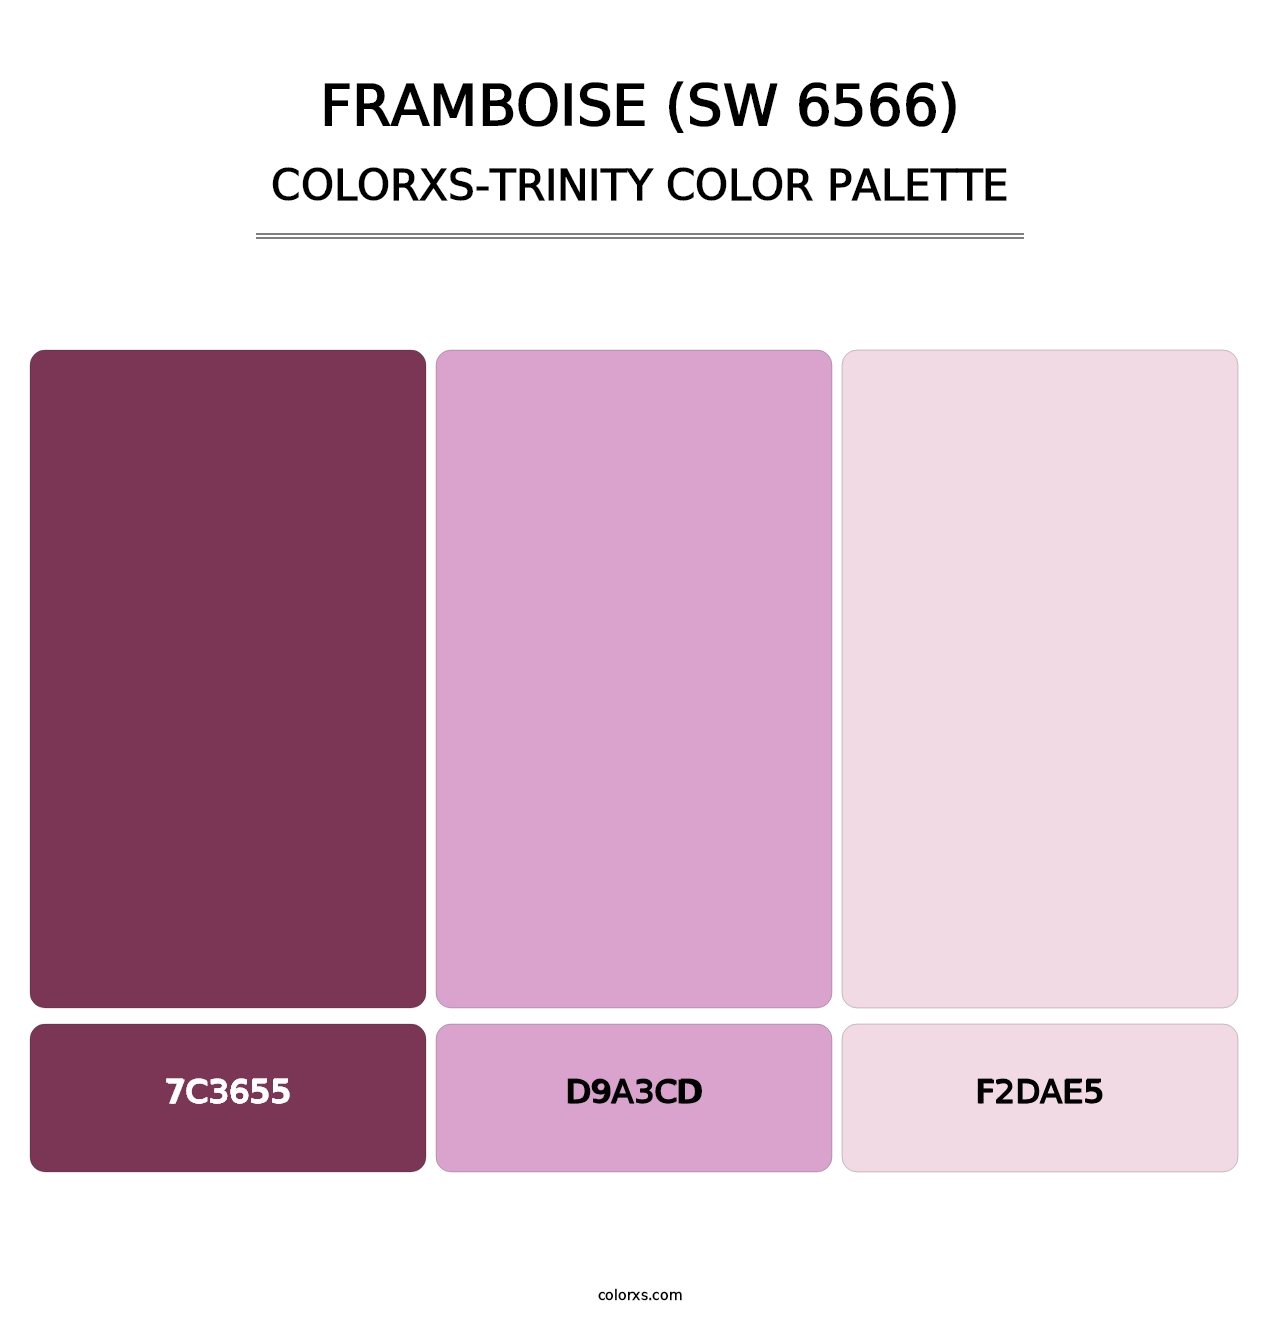 Framboise (SW 6566) - Colorxs Trinity Palette